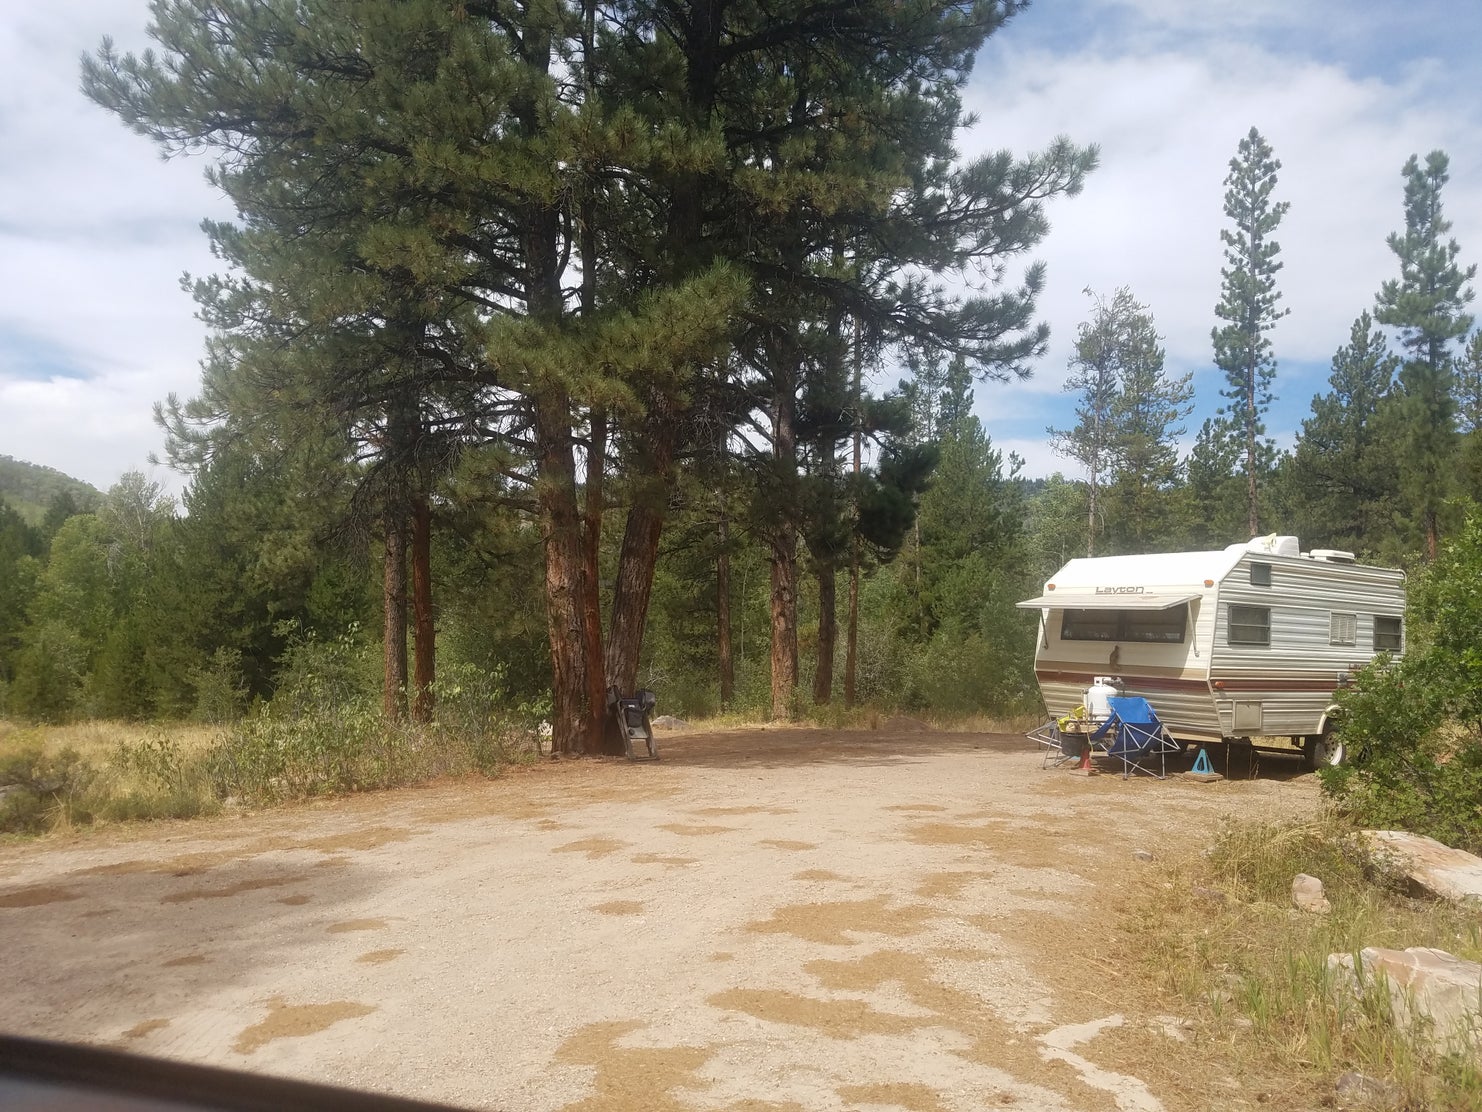 Wasatch/Yellow Pine Campground | The Dyrt